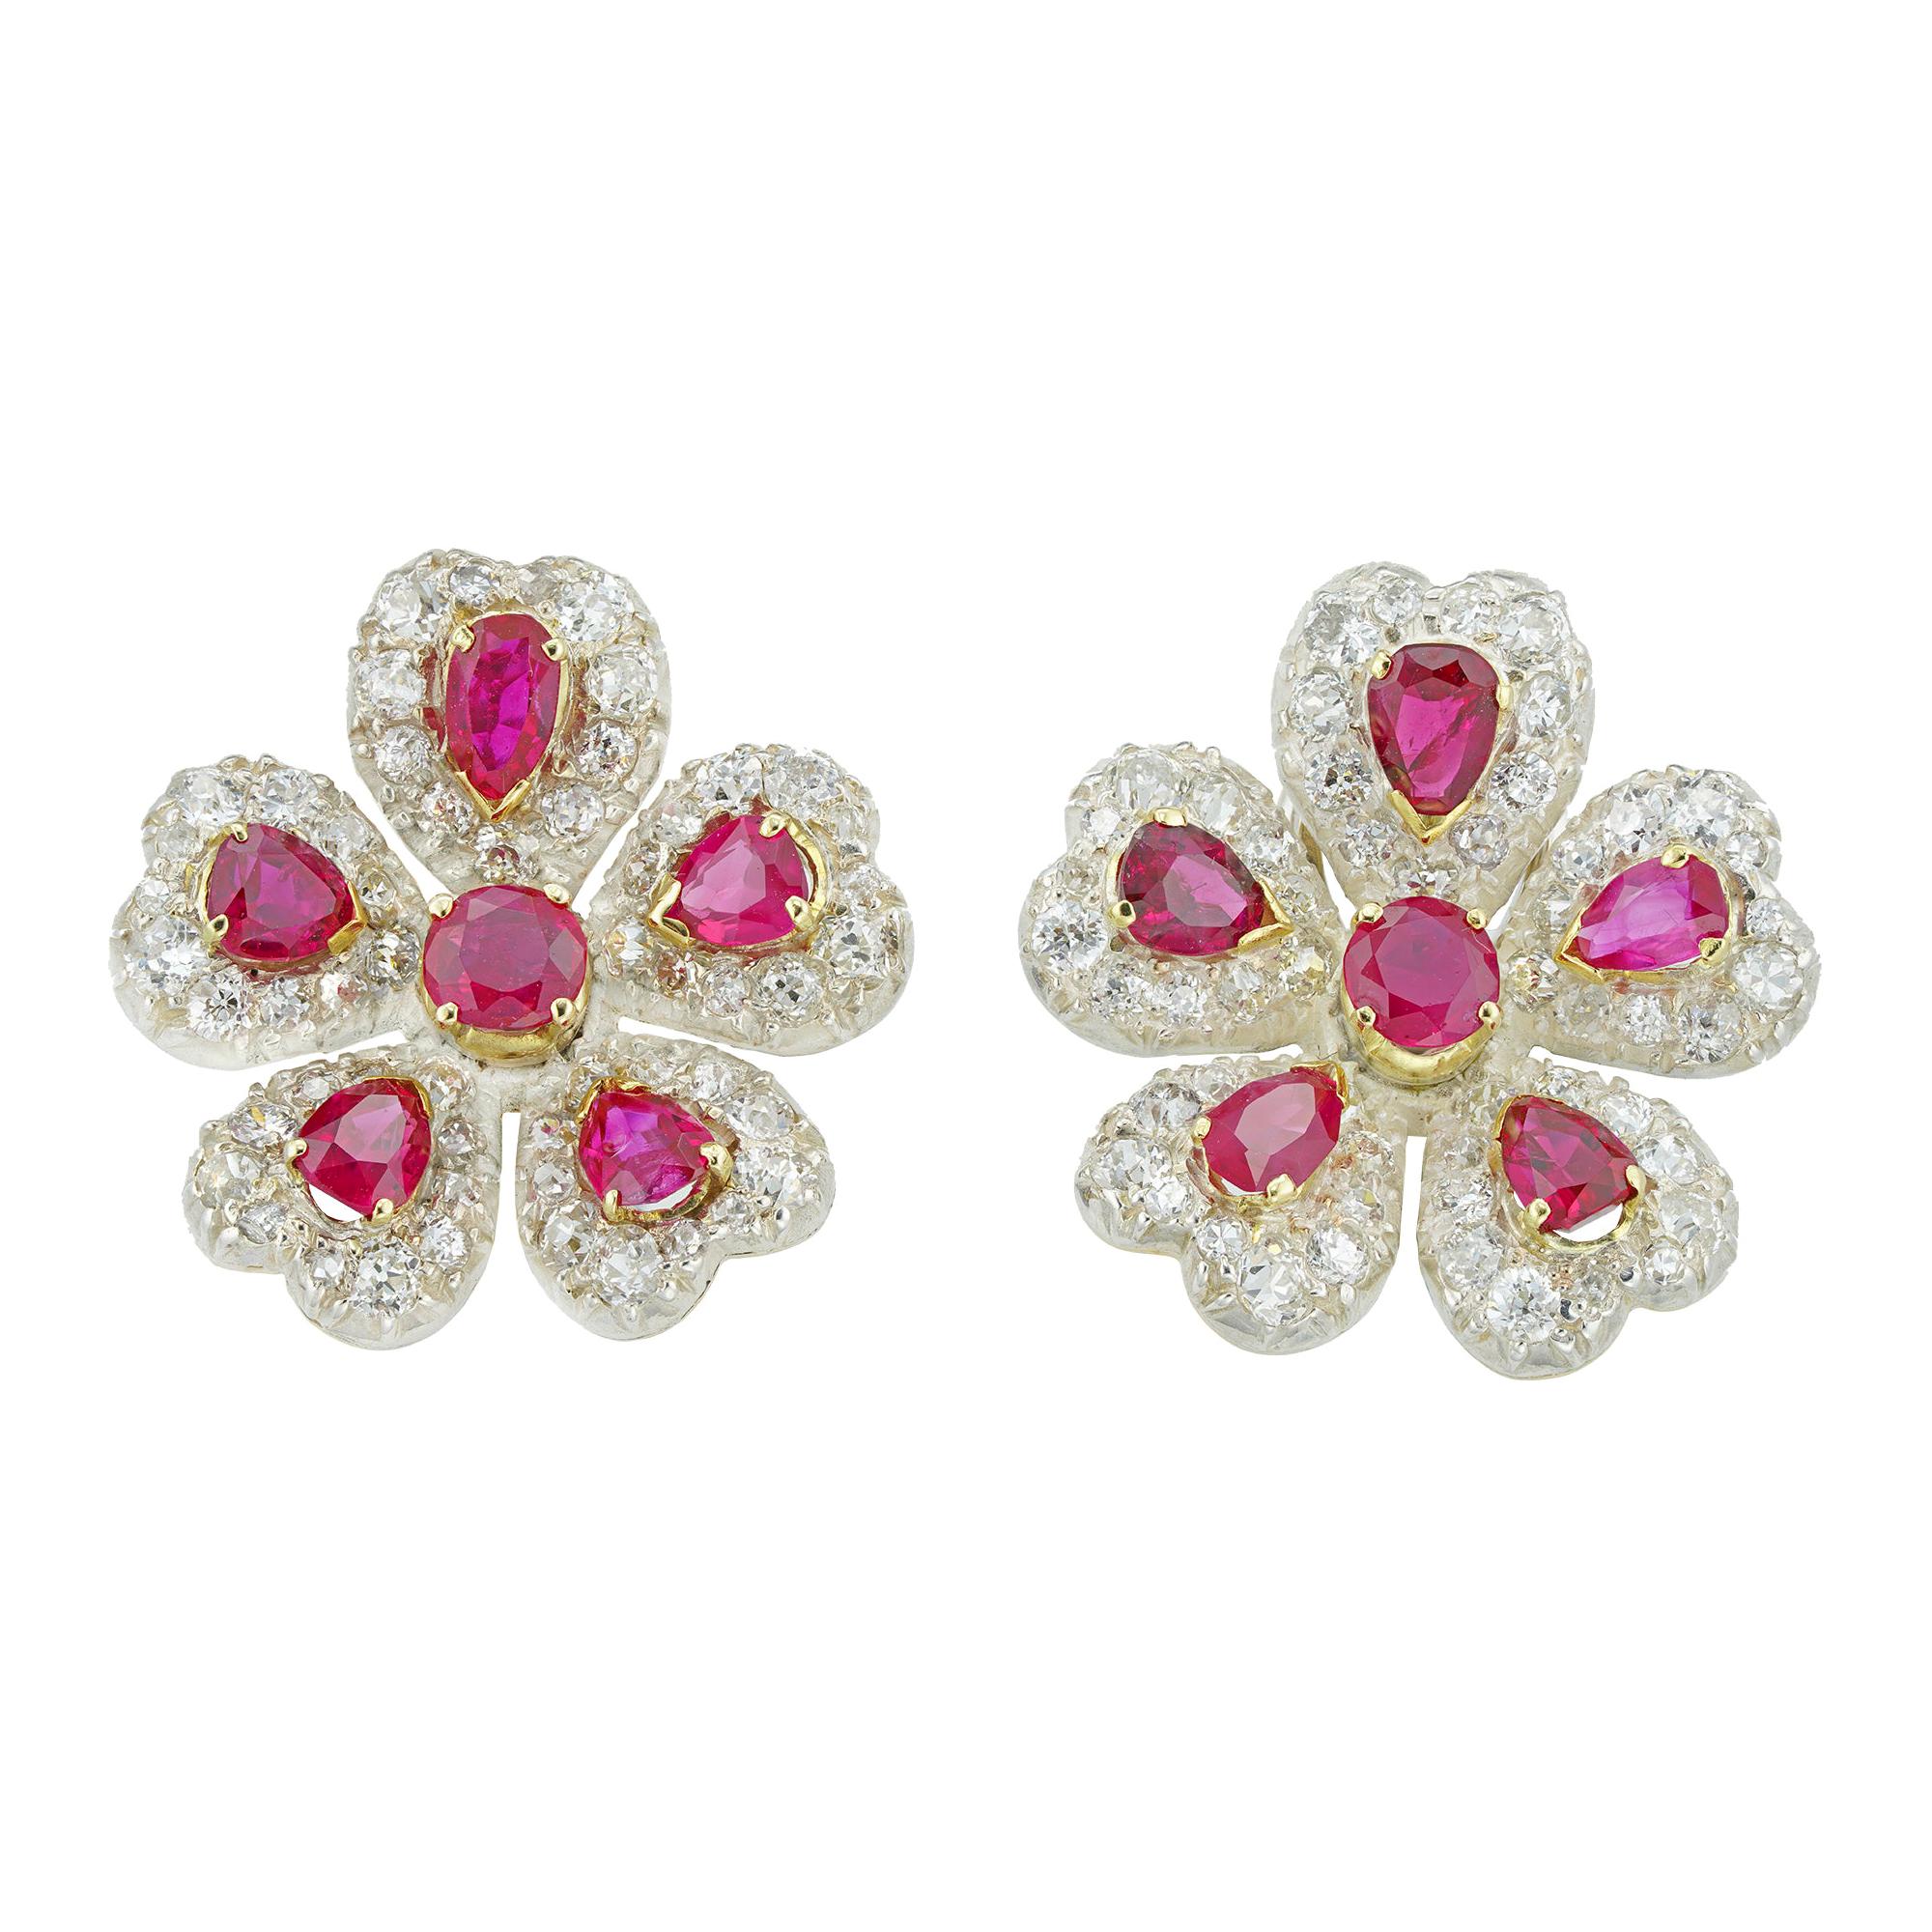 Pair of Late Victorian Ruby and Diamond Earrings